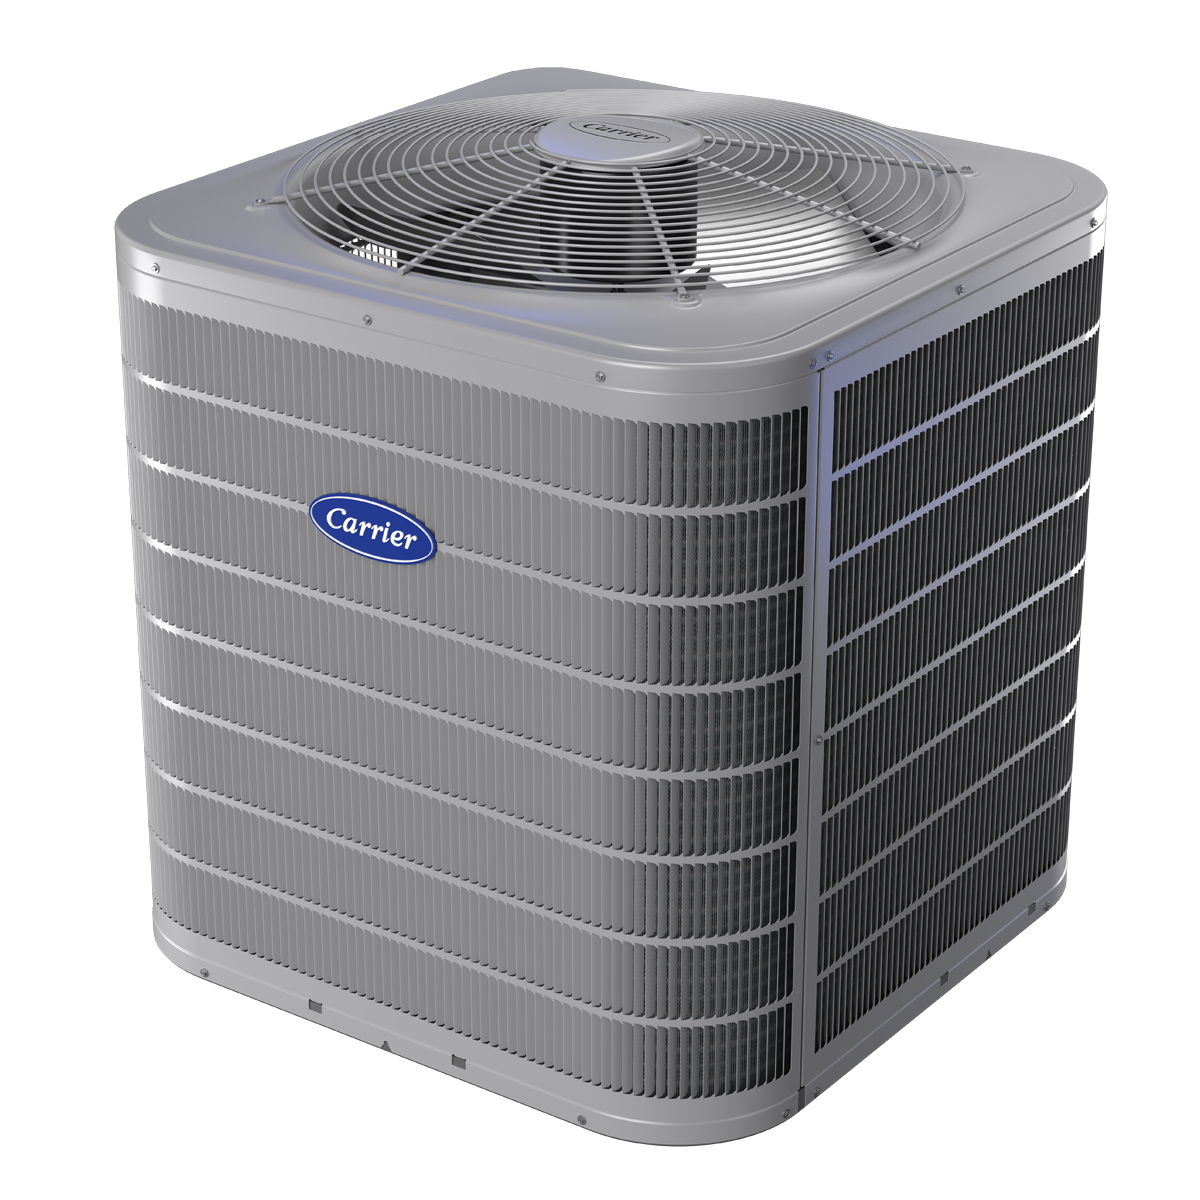 Carrier Performance 16 Air Conditioner